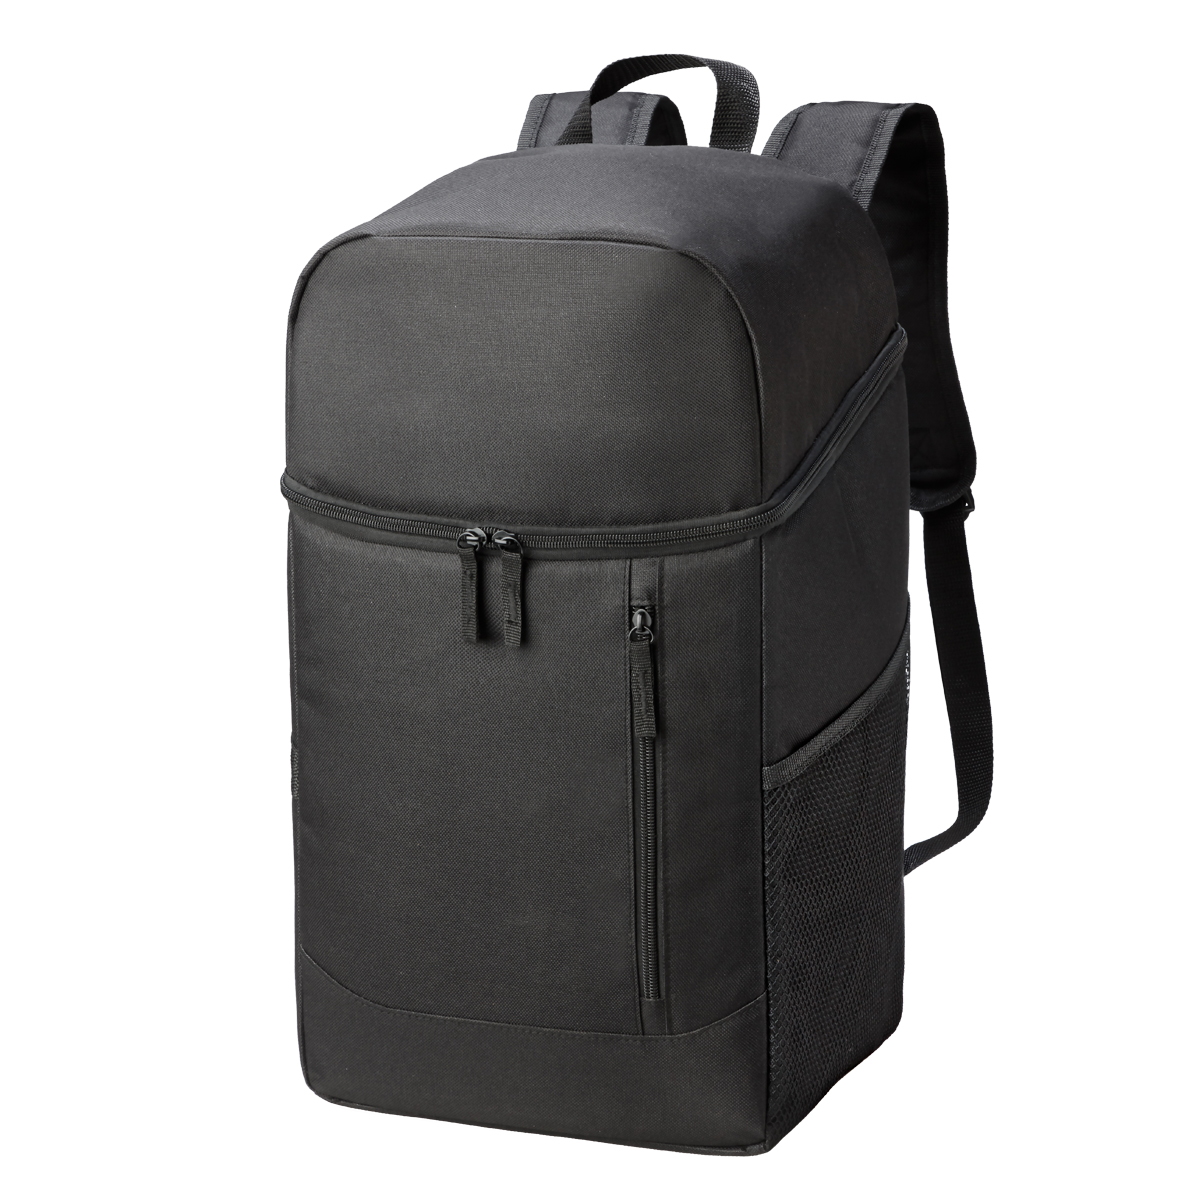 Bayson Backpack Cooler Product Image